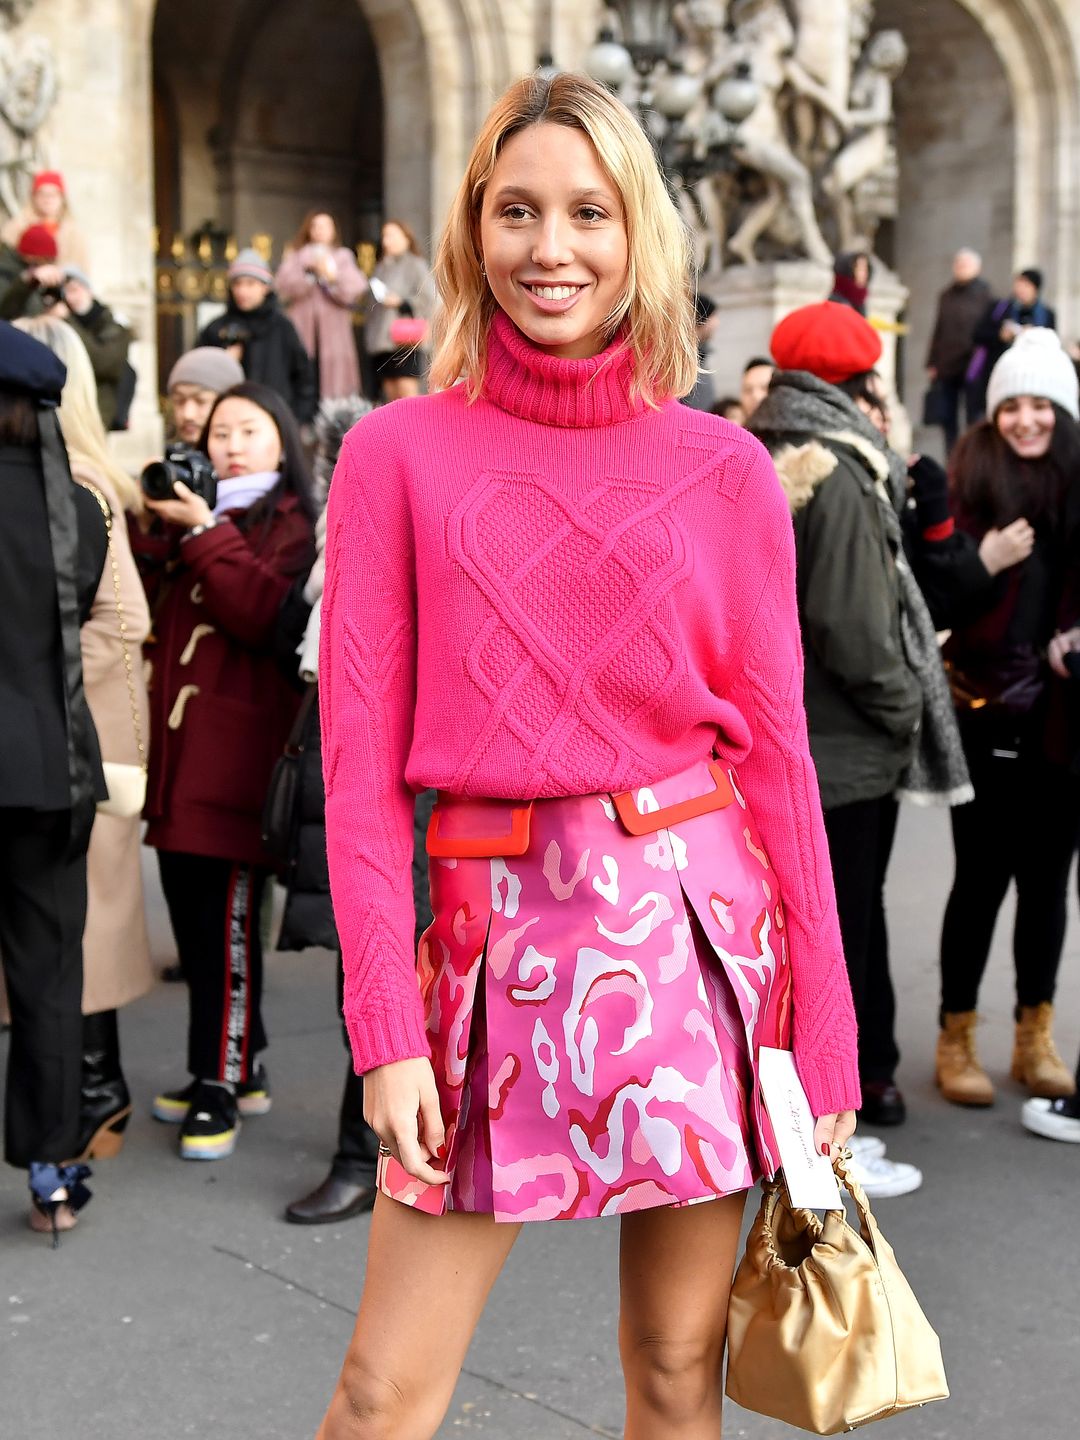 Barbirecore dominated the luxury market as demonstrated here by Princess Maria-Olympia of Greece during the Schiaparelli show in 2019